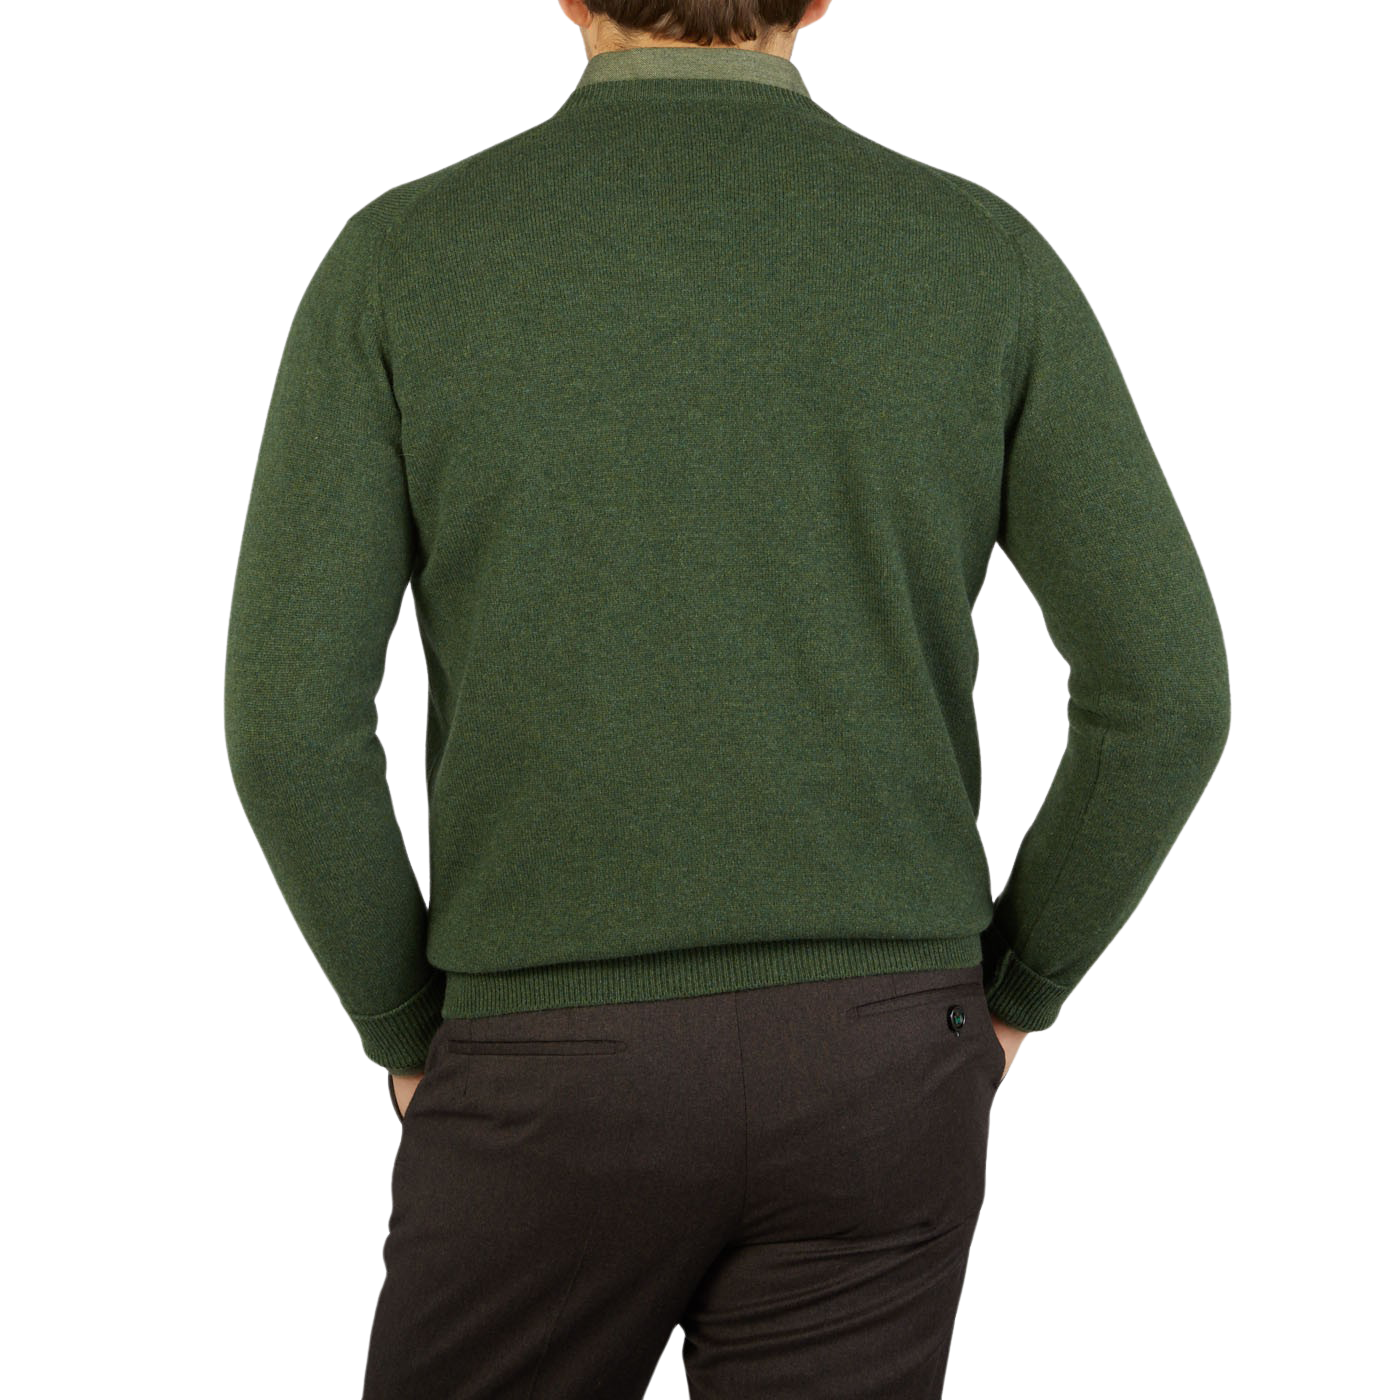 The back view of a man wearing a Rosemary Green V-Neck Lambswool Sweater by William Lockie, radiating warmth.